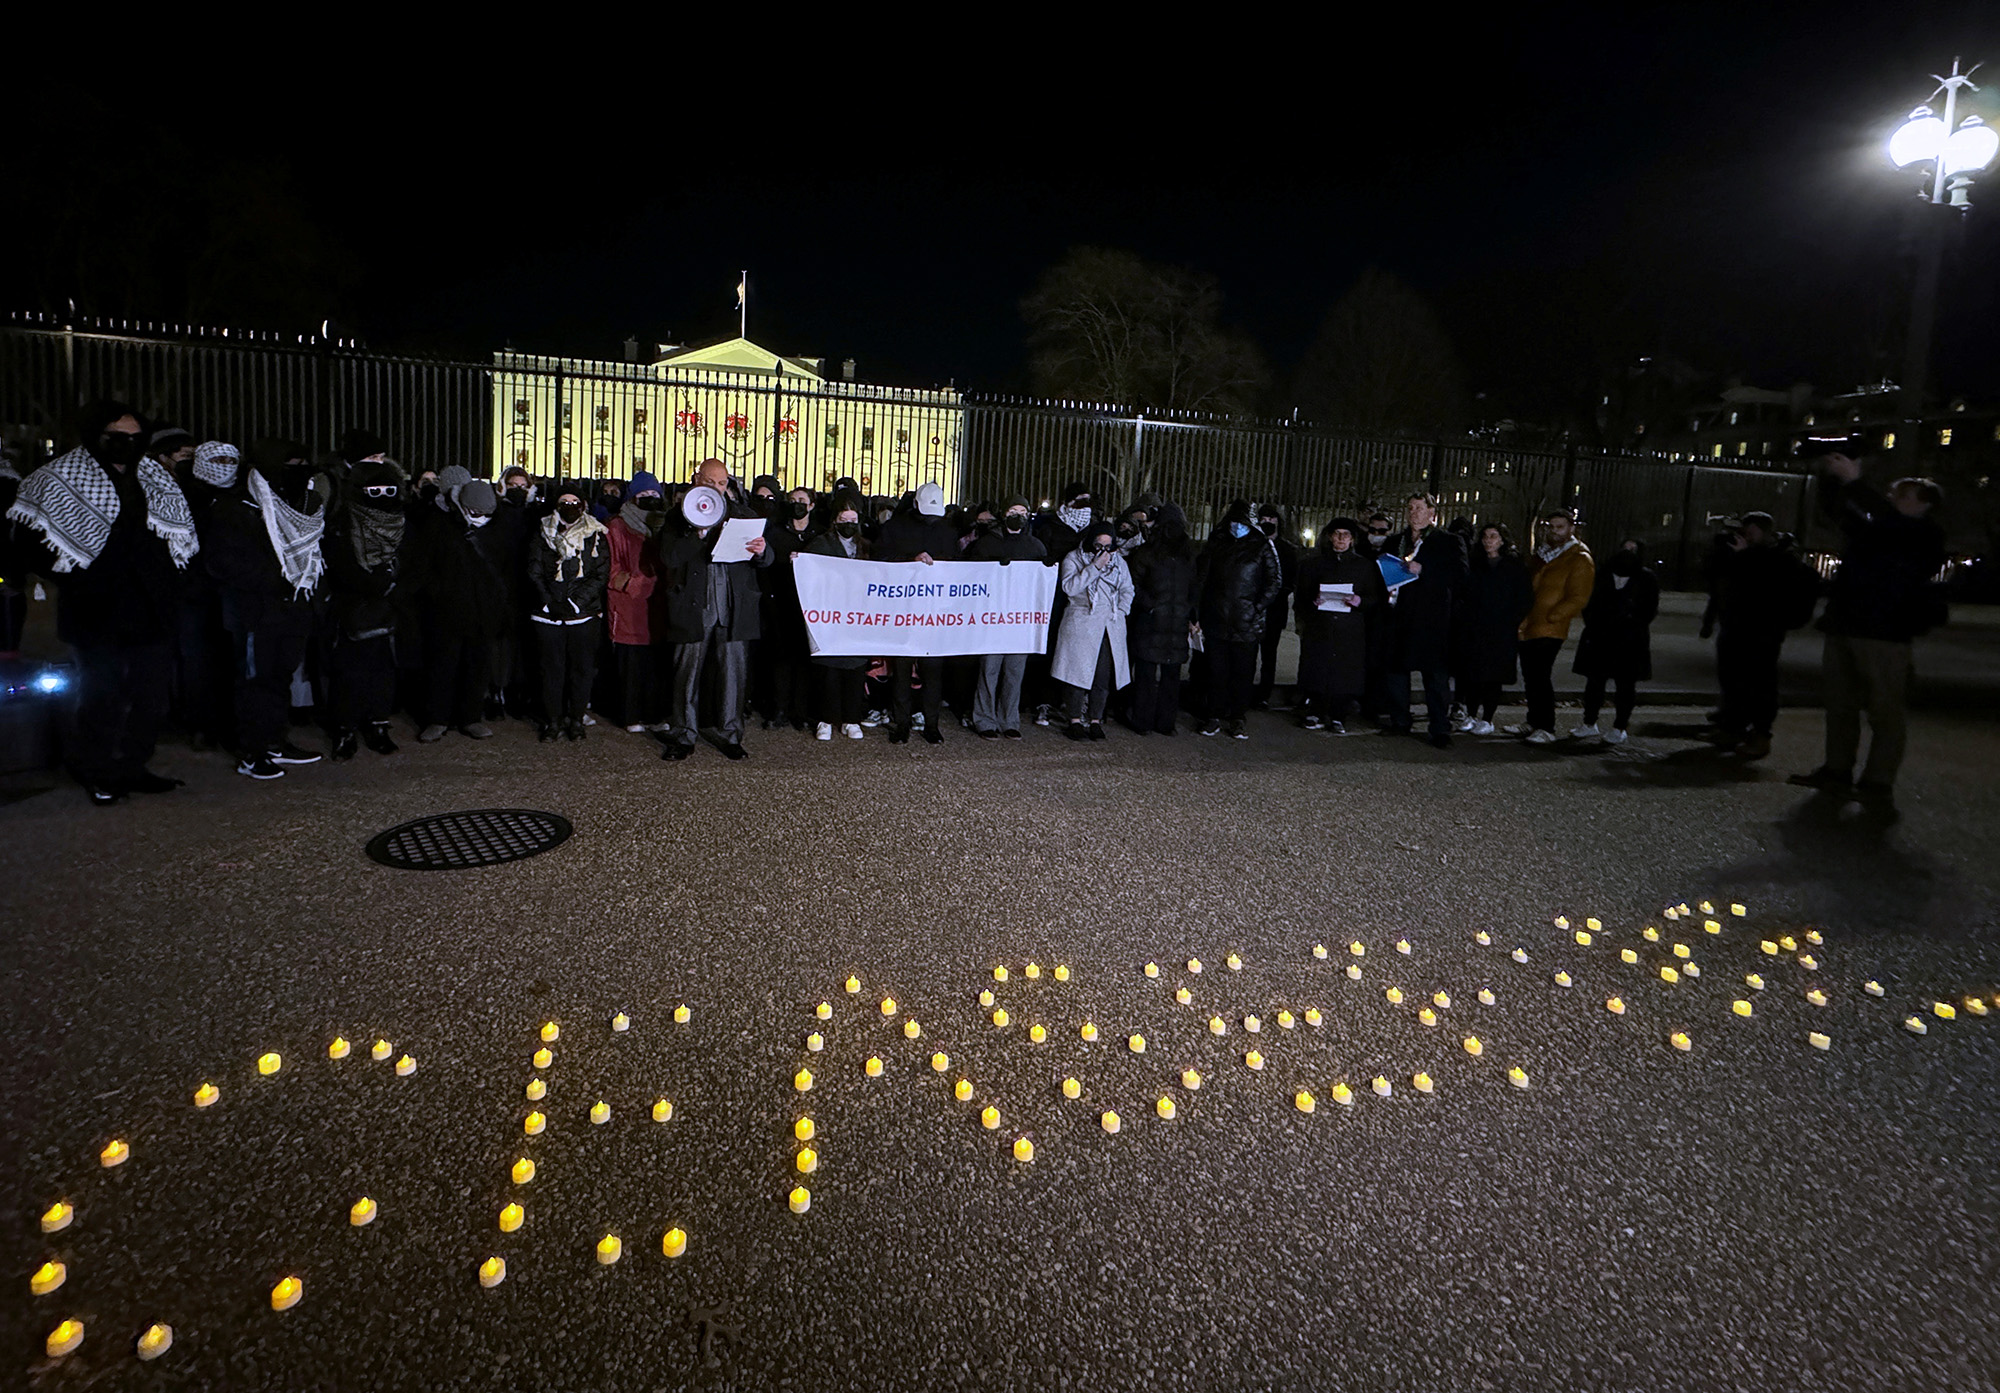 Biden administration staffers hold a vigil outside the White House to call for a permanent ceasefire in the ongoing conflict between Israel and the Palestinian Islamist group Hamas, in Washington, D.C, on December 13.